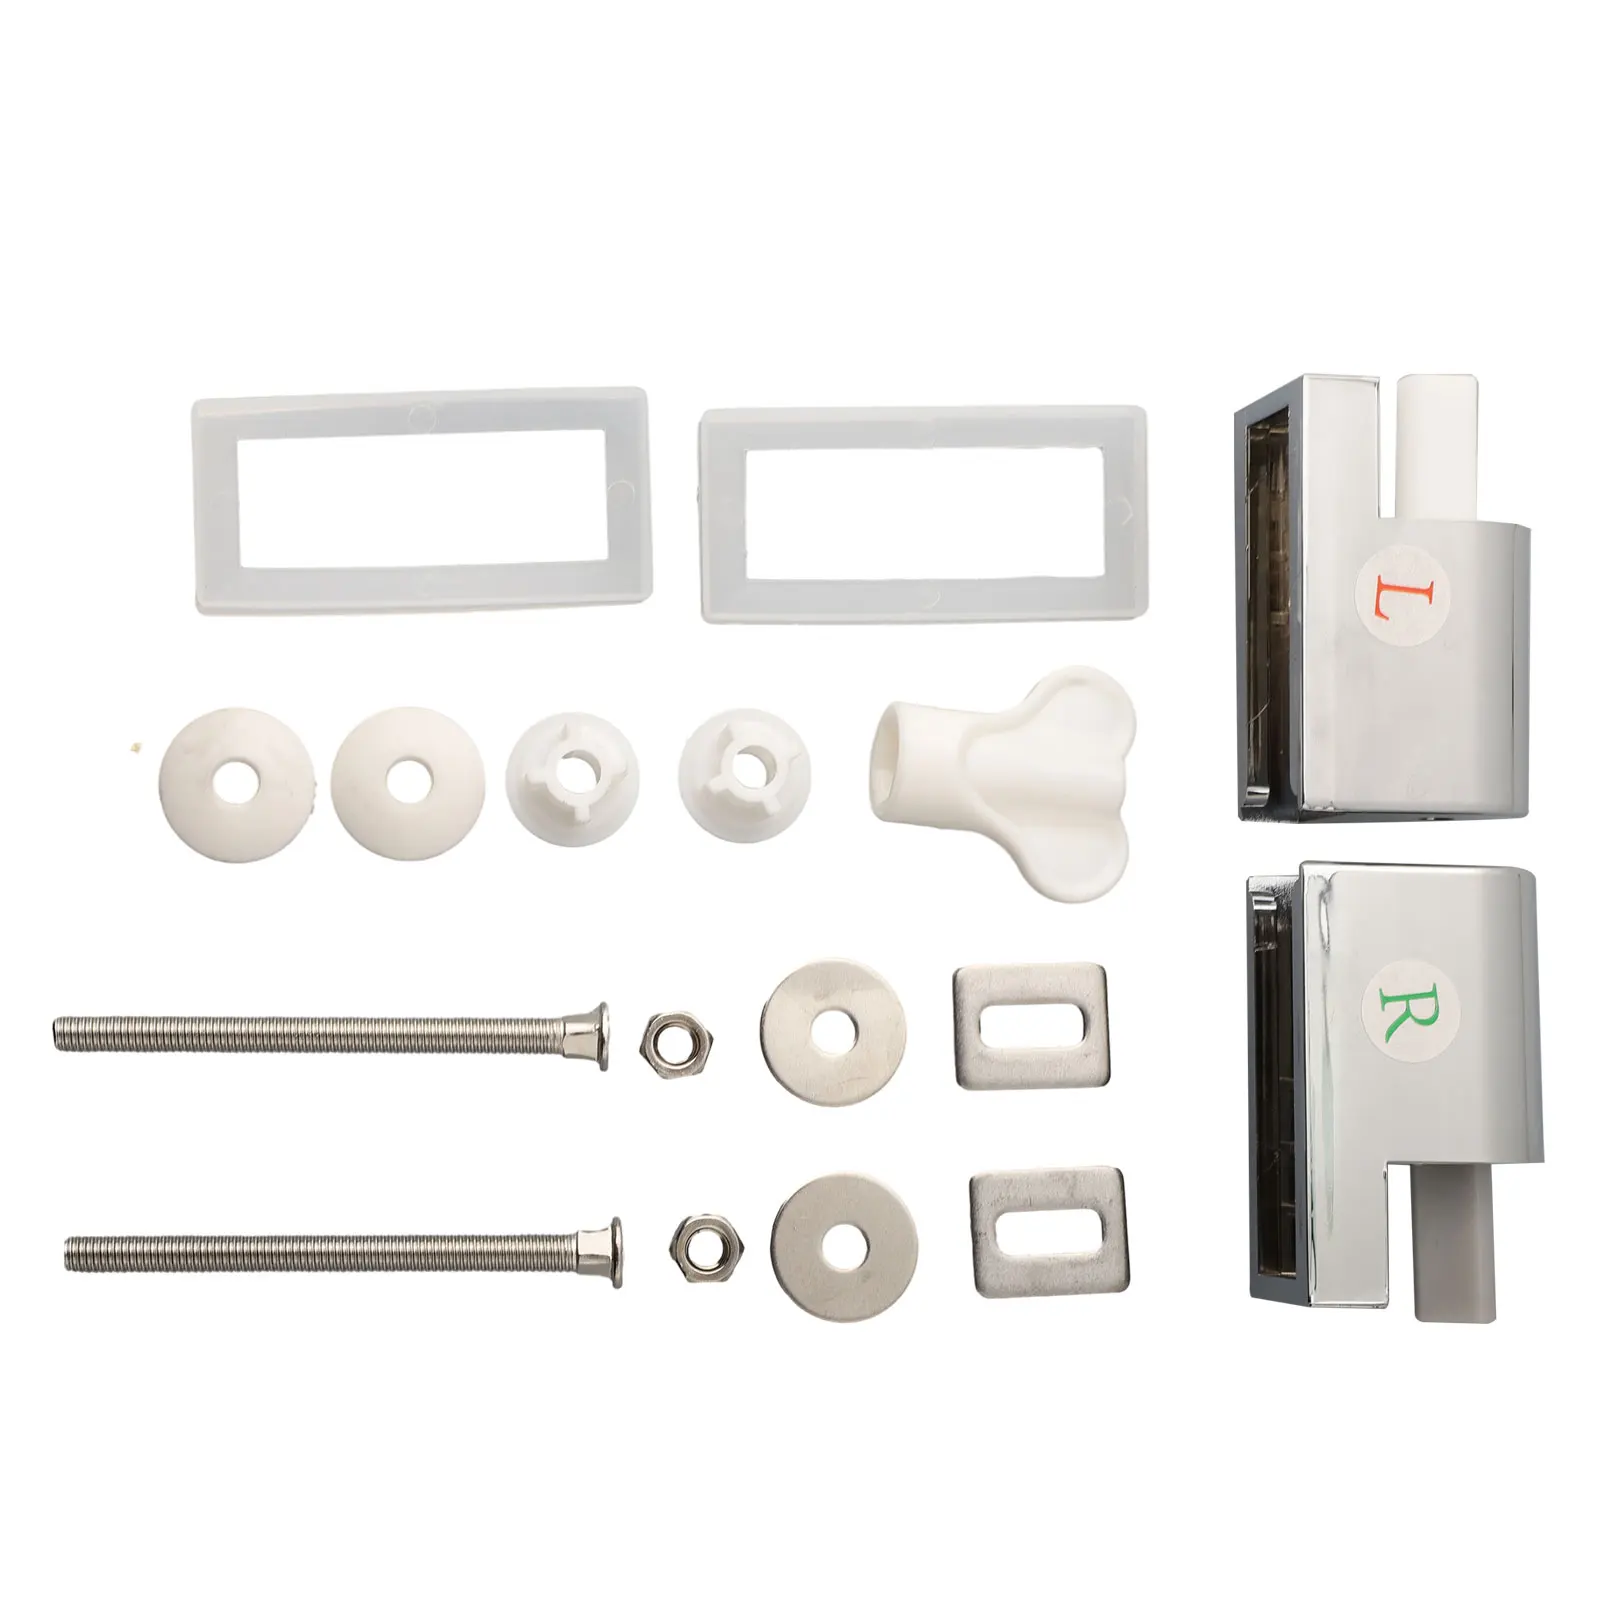 Hinge Kit Toilet Cover Slow-down Connector Toilet Seat Hinges Toilets Soft Close Replacement Accessories Bathroom Hardware